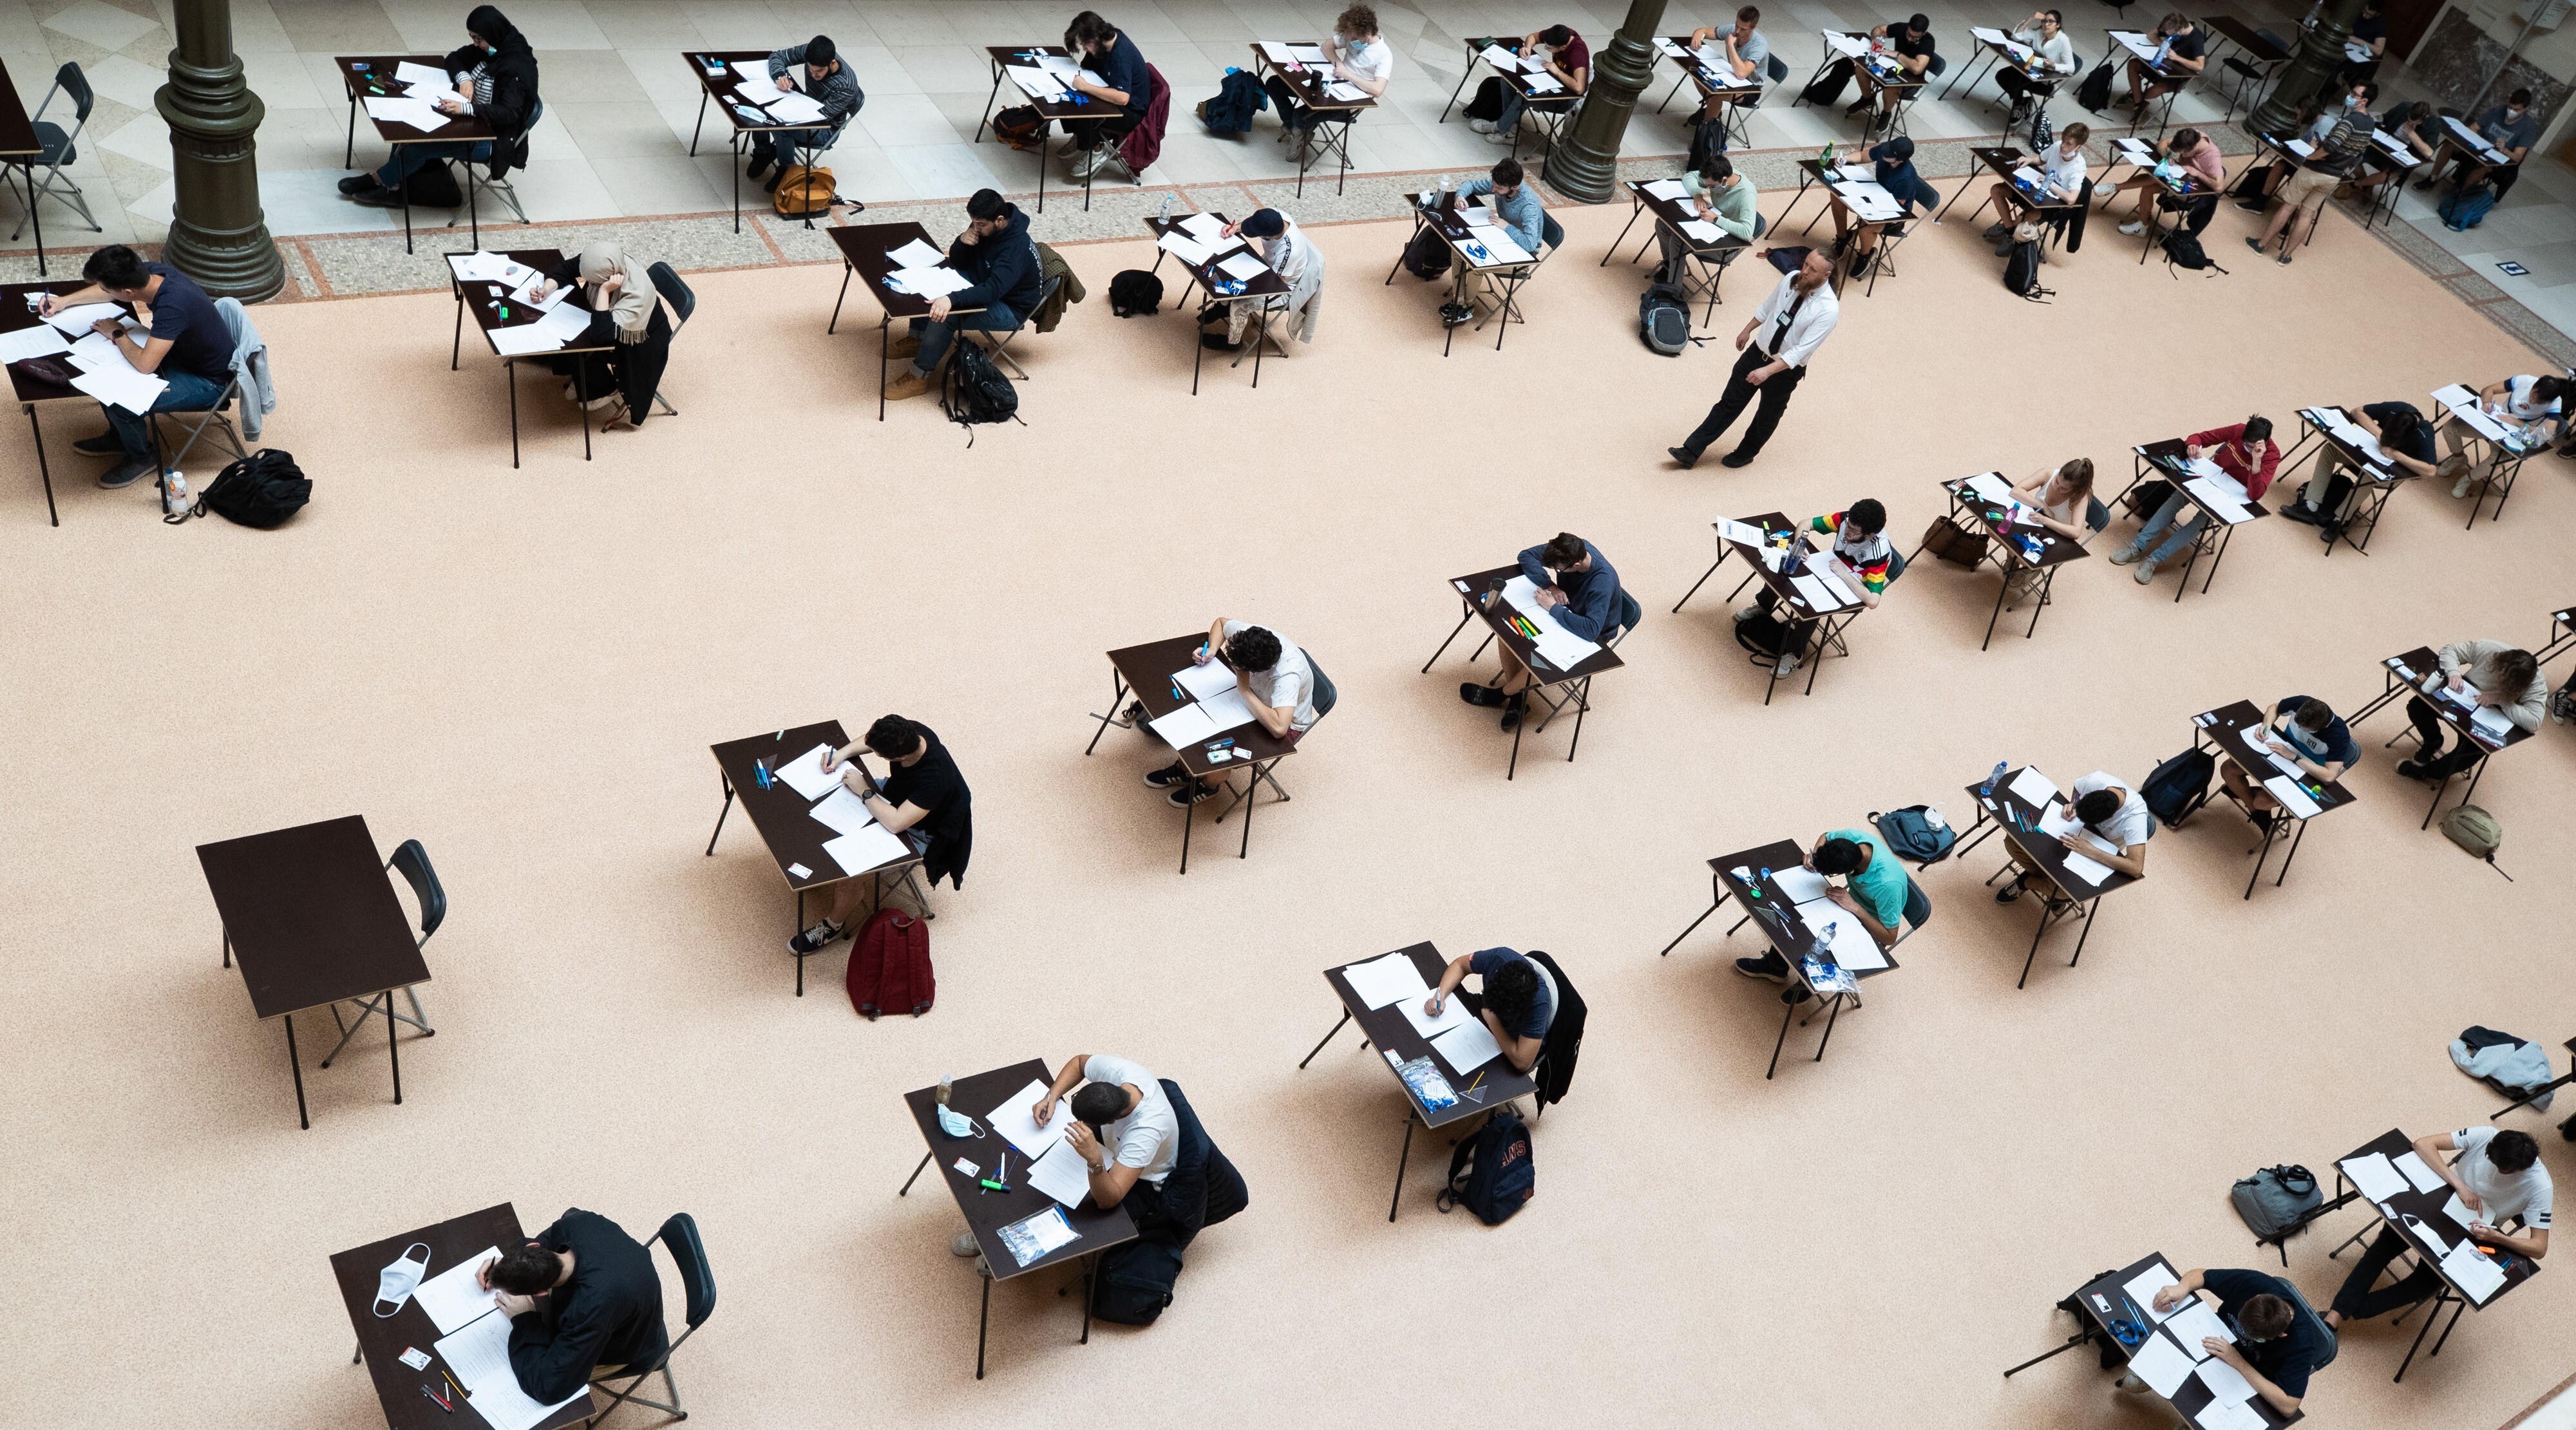 Students of Belgium’s VUB university take their exams at the Art and History Museum in Brussels while maintaining social distancing amid the coronavirus pandemic. Photo: DPA